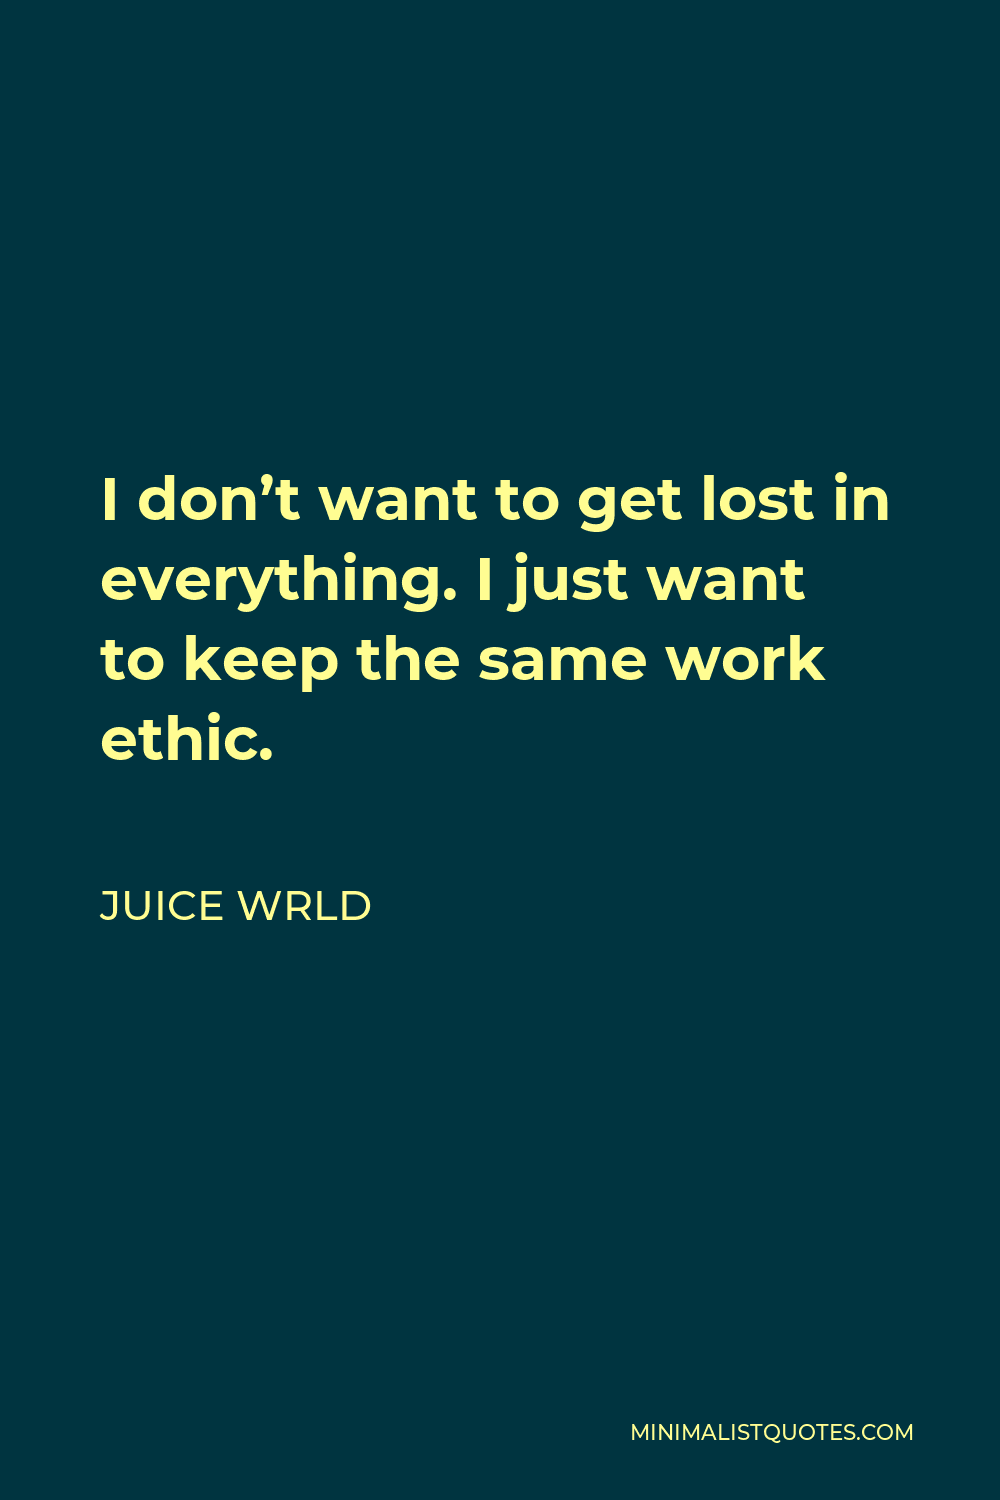 Juice Wrld Quote - I don’t want to get lost in everything. I just want to keep the same work ethic.